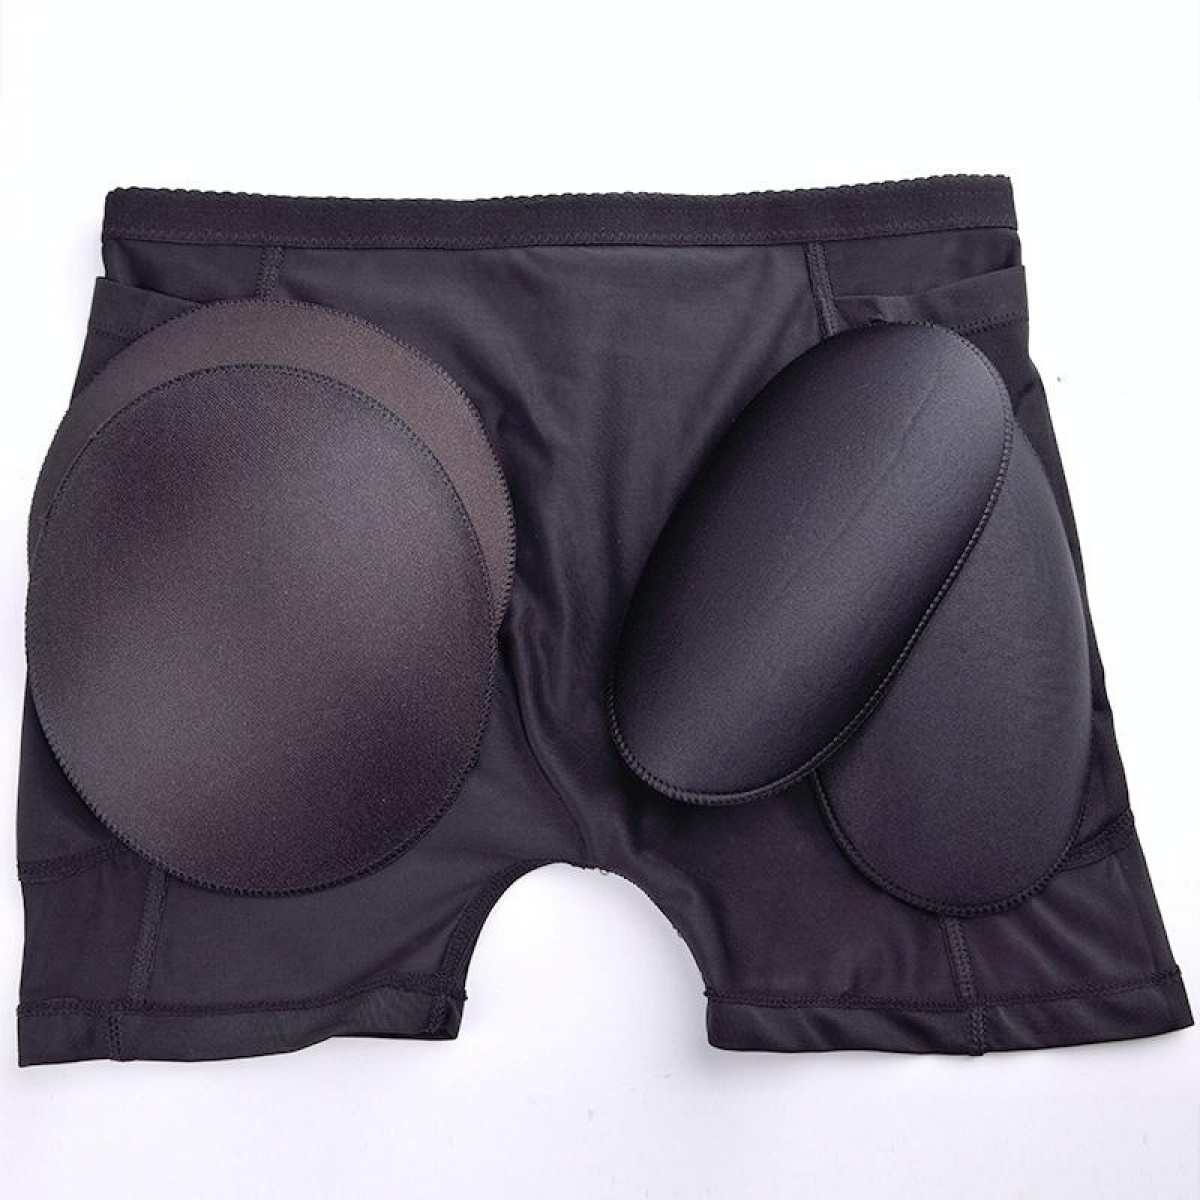 Full Buttocks and Hips Sponge Cushion Insert to Increase Hips and Hips Lifting Panties, Size: XL(Complexion)